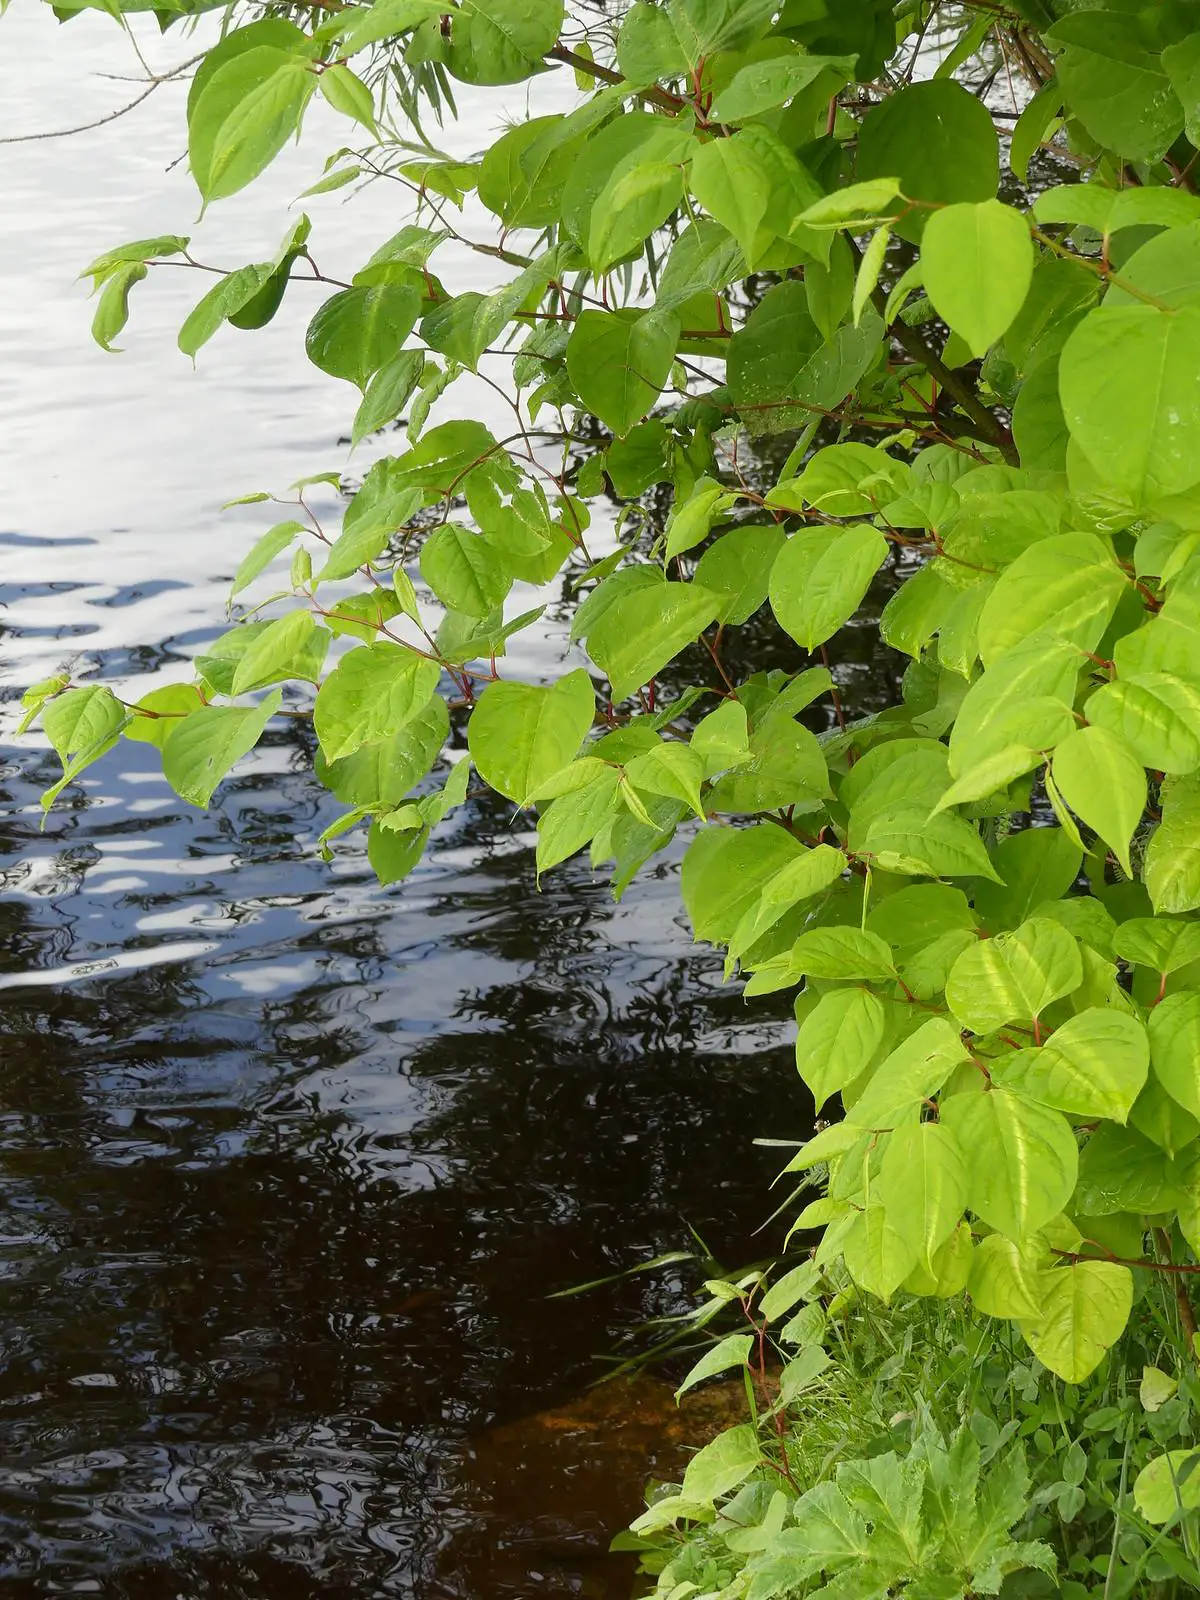 Japanese knotweed grows right to the edge of the river embankment